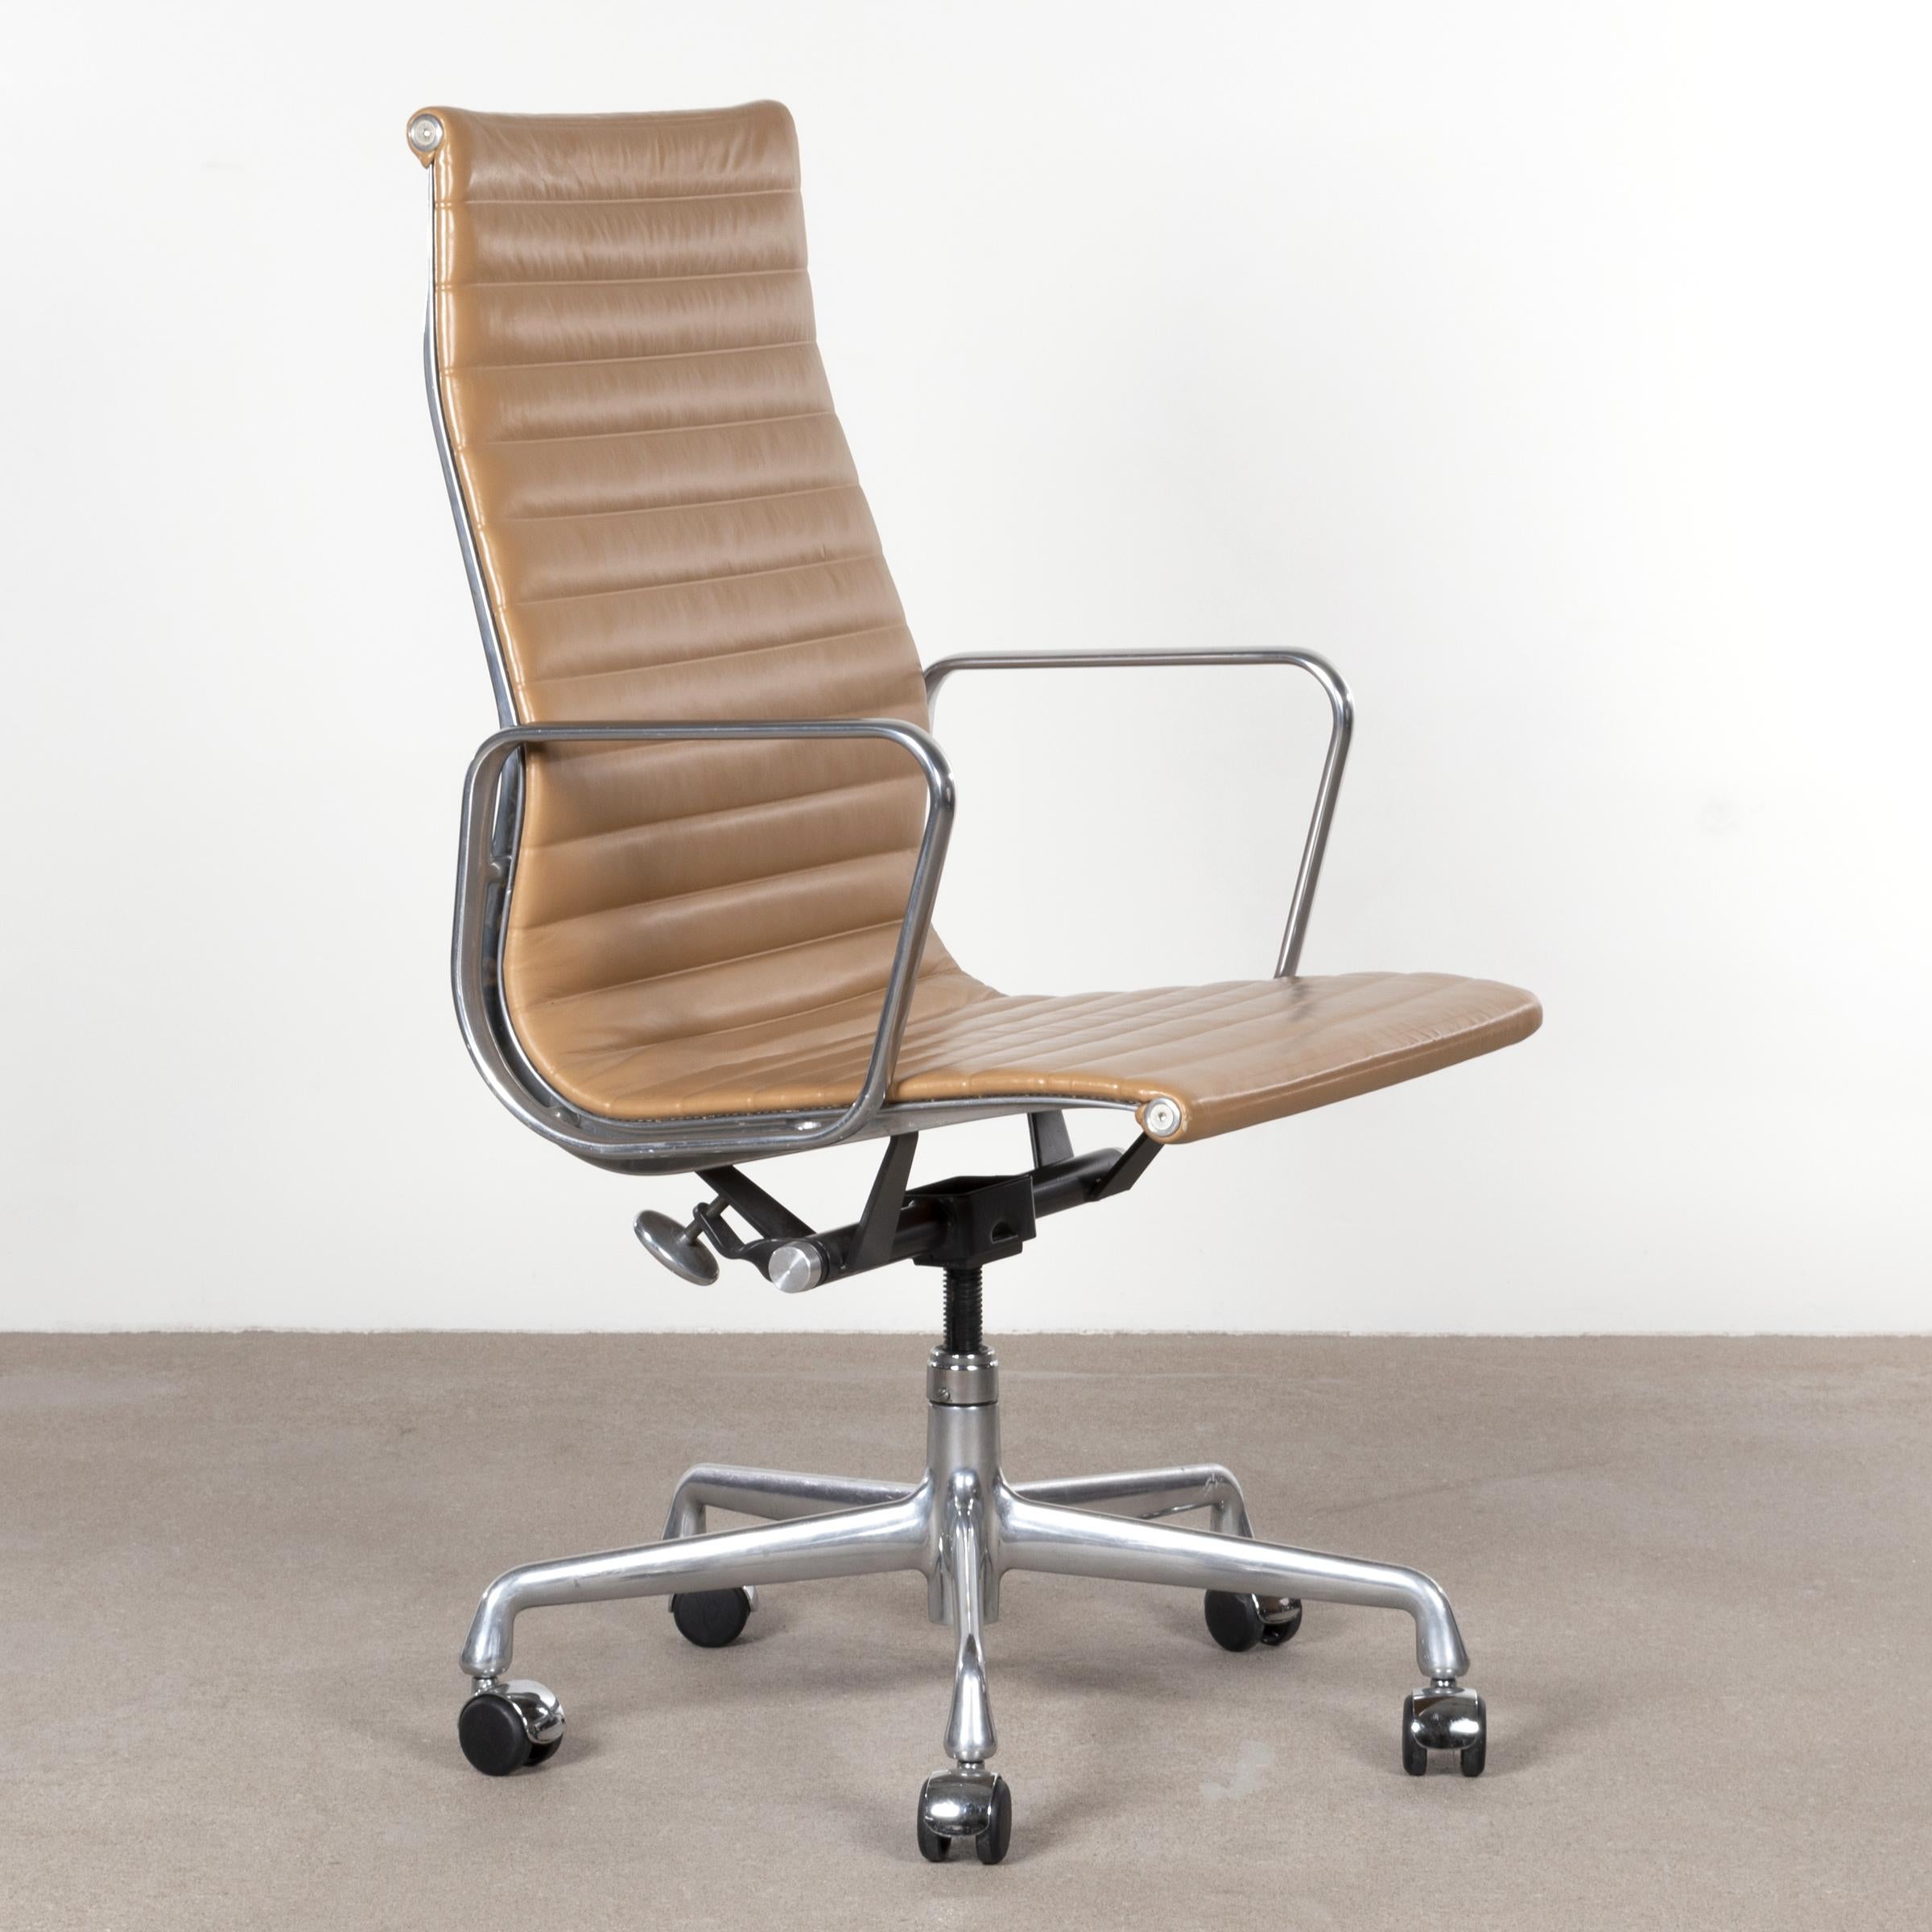 American Eames Executive Office Chair in Cognac Leather for Herman Miller, USA